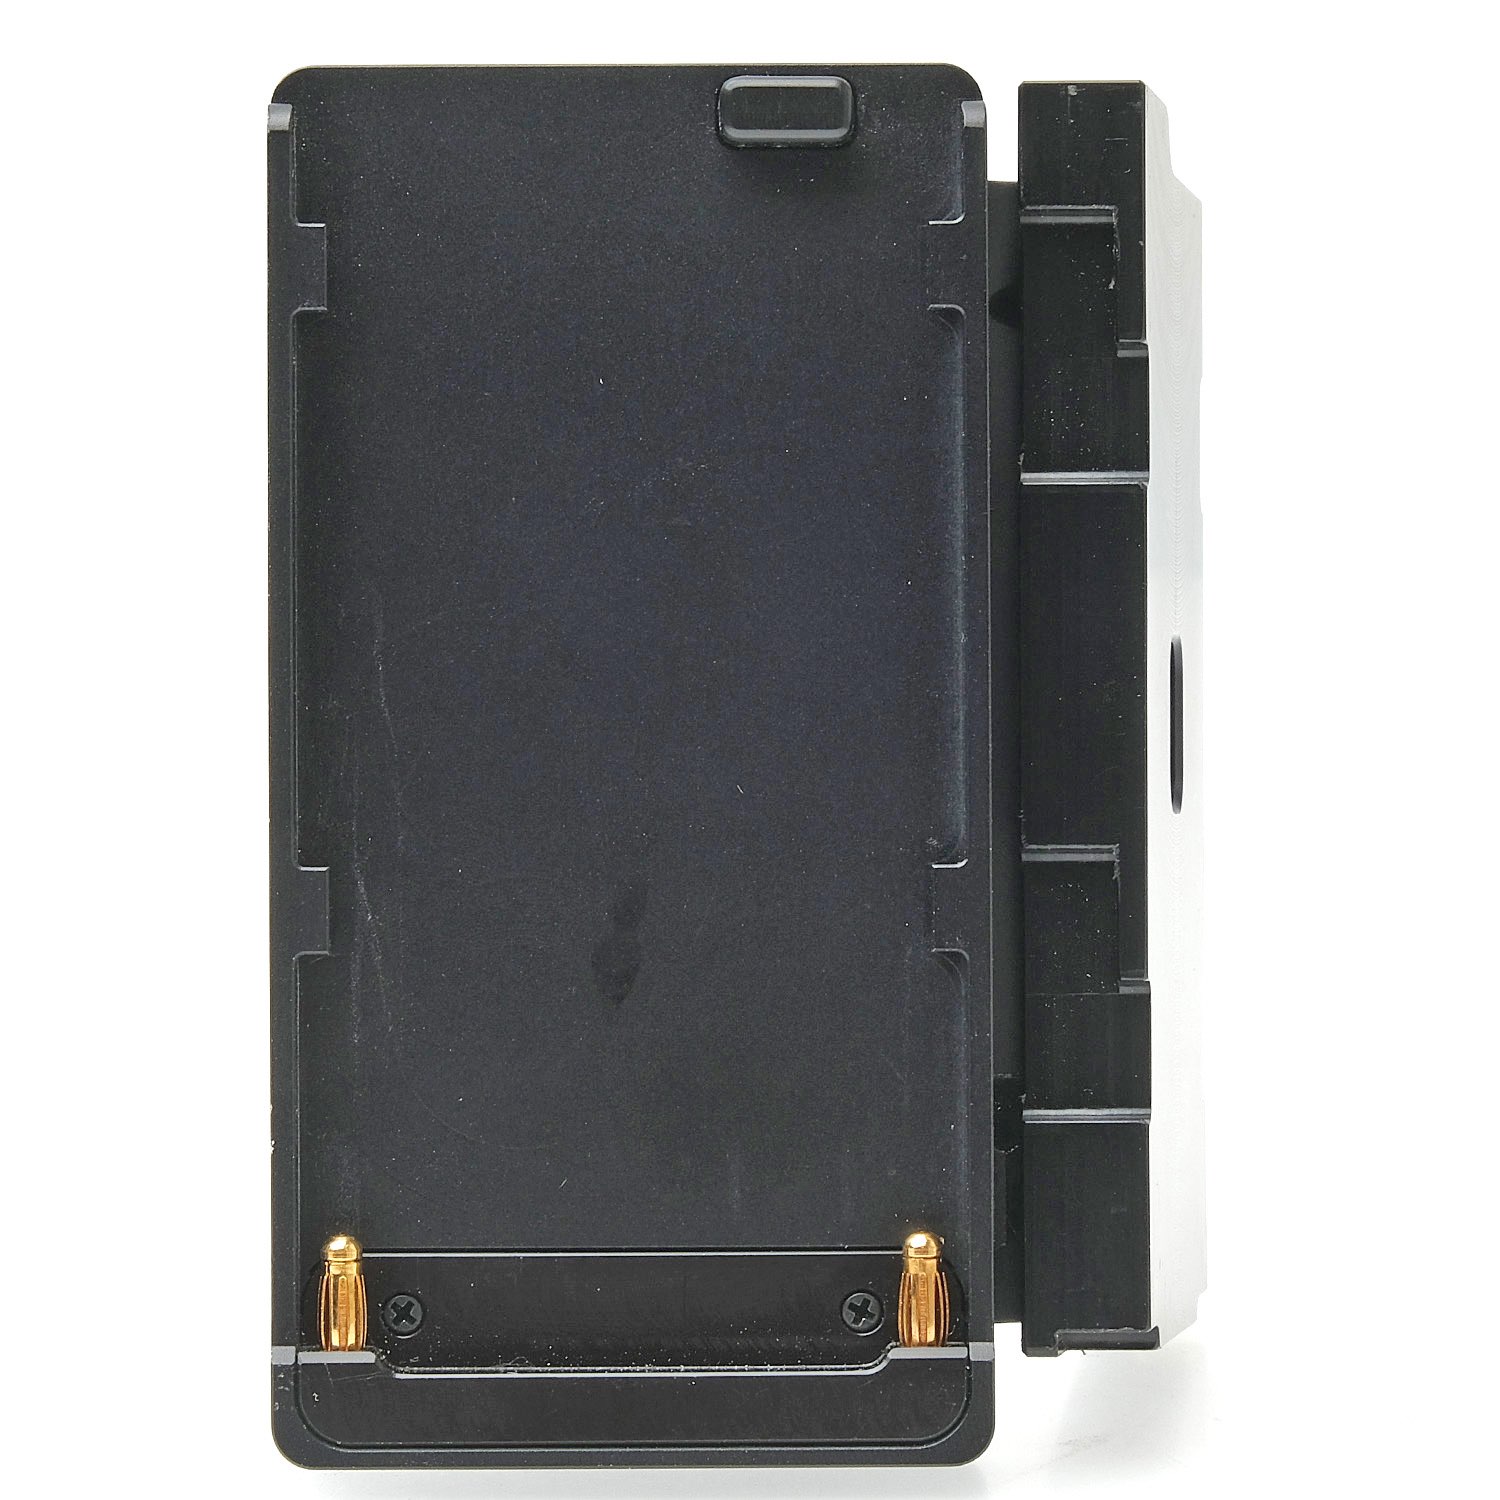 Hasselblad CFV Battery Adapter Plate (9)